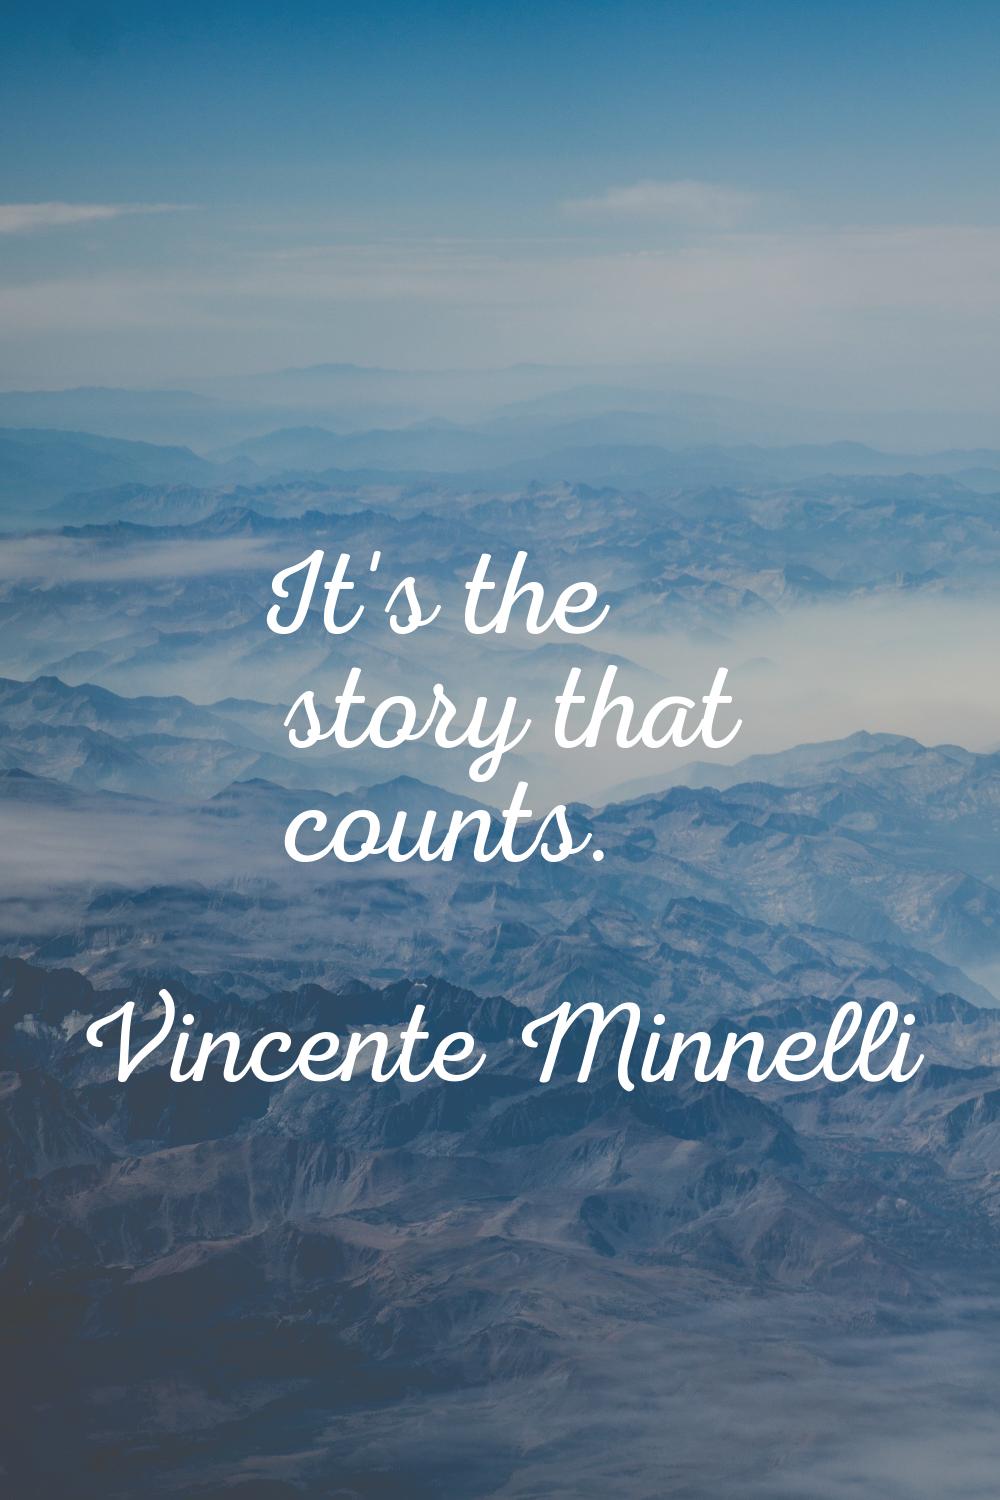 It's the story that counts.